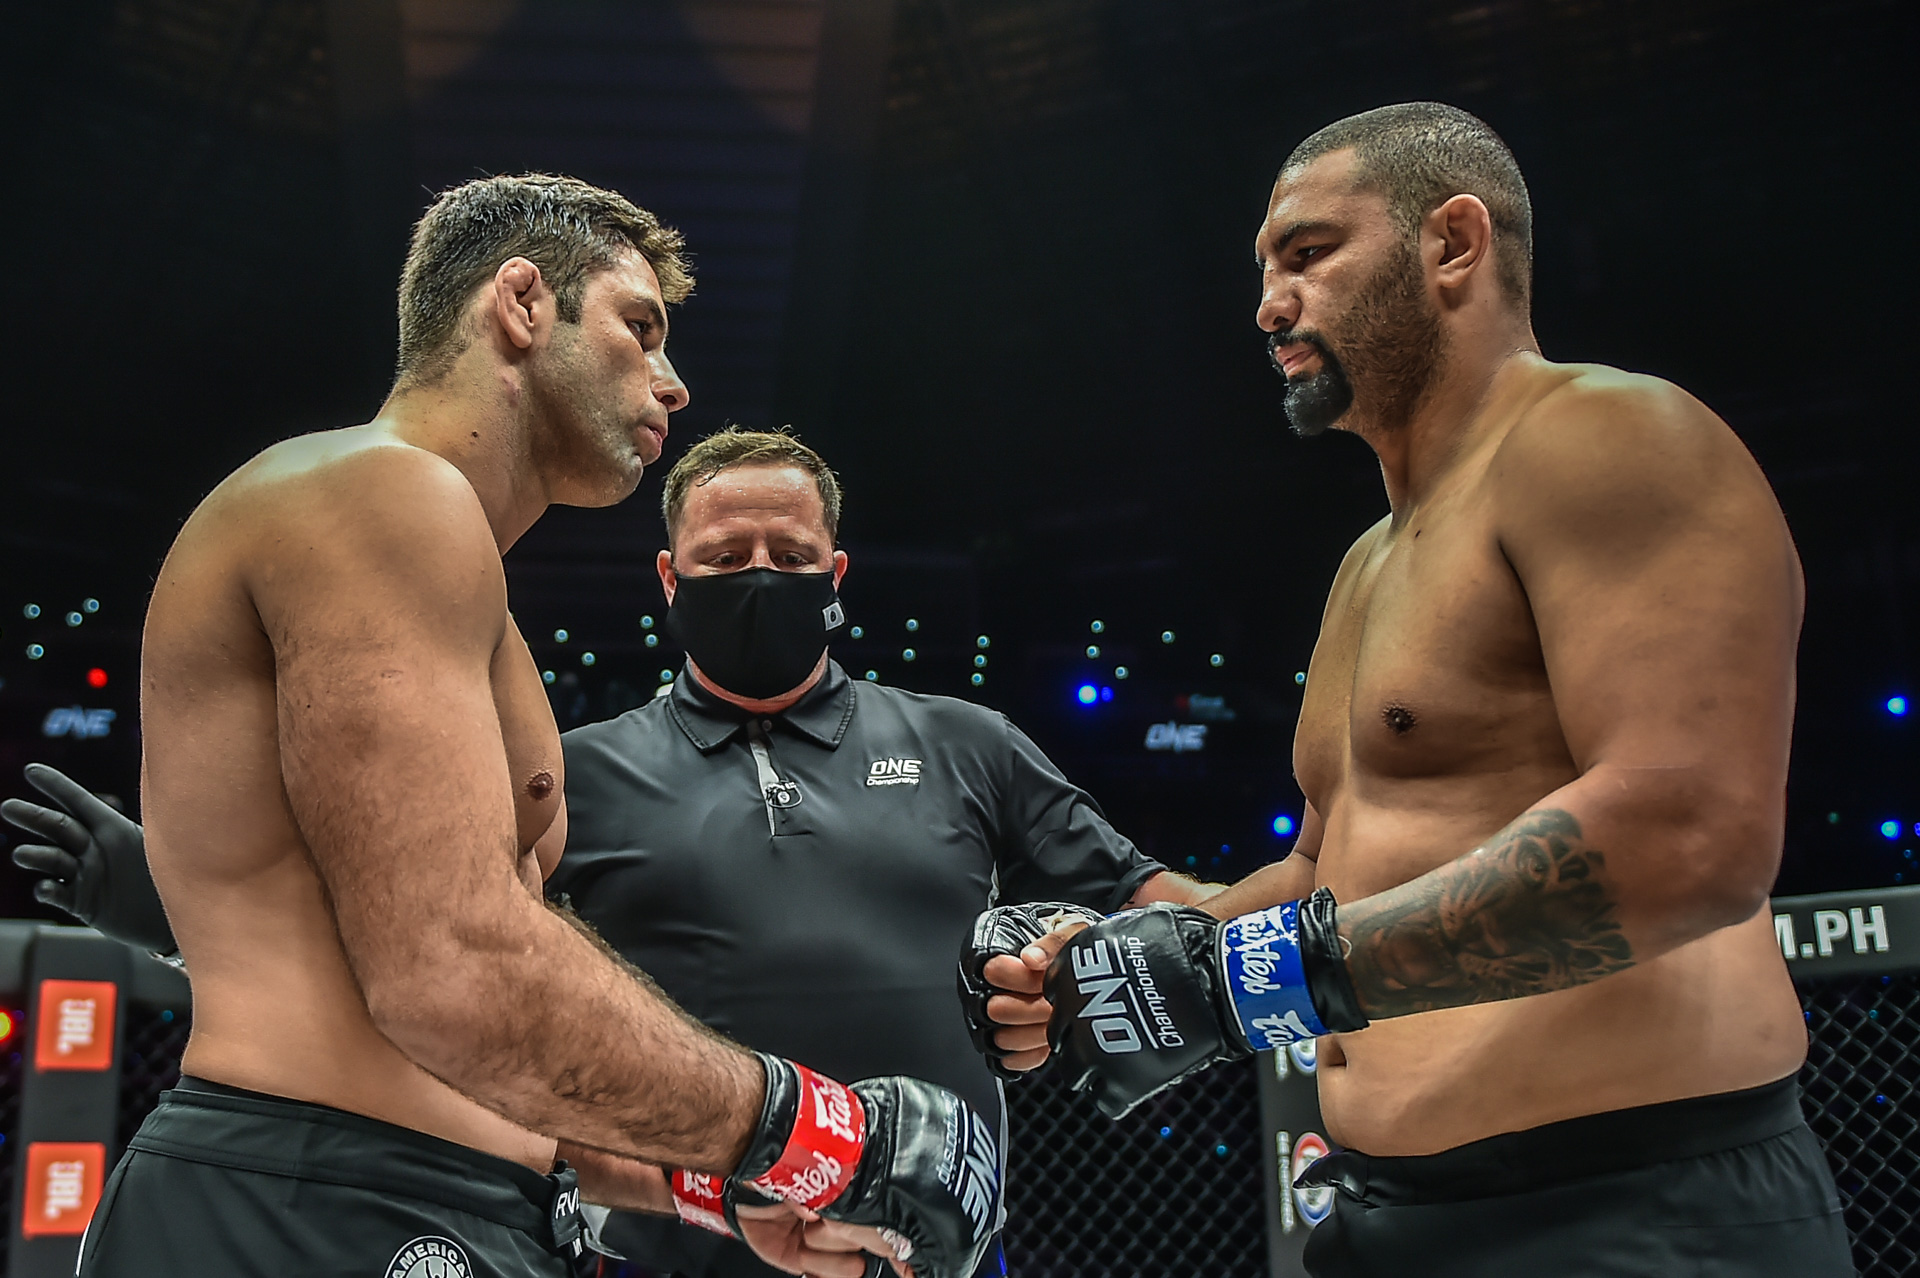 Pictures from the MMA fight between Marcus Almeida and Anderson Silva at ONE: REVOLUTION